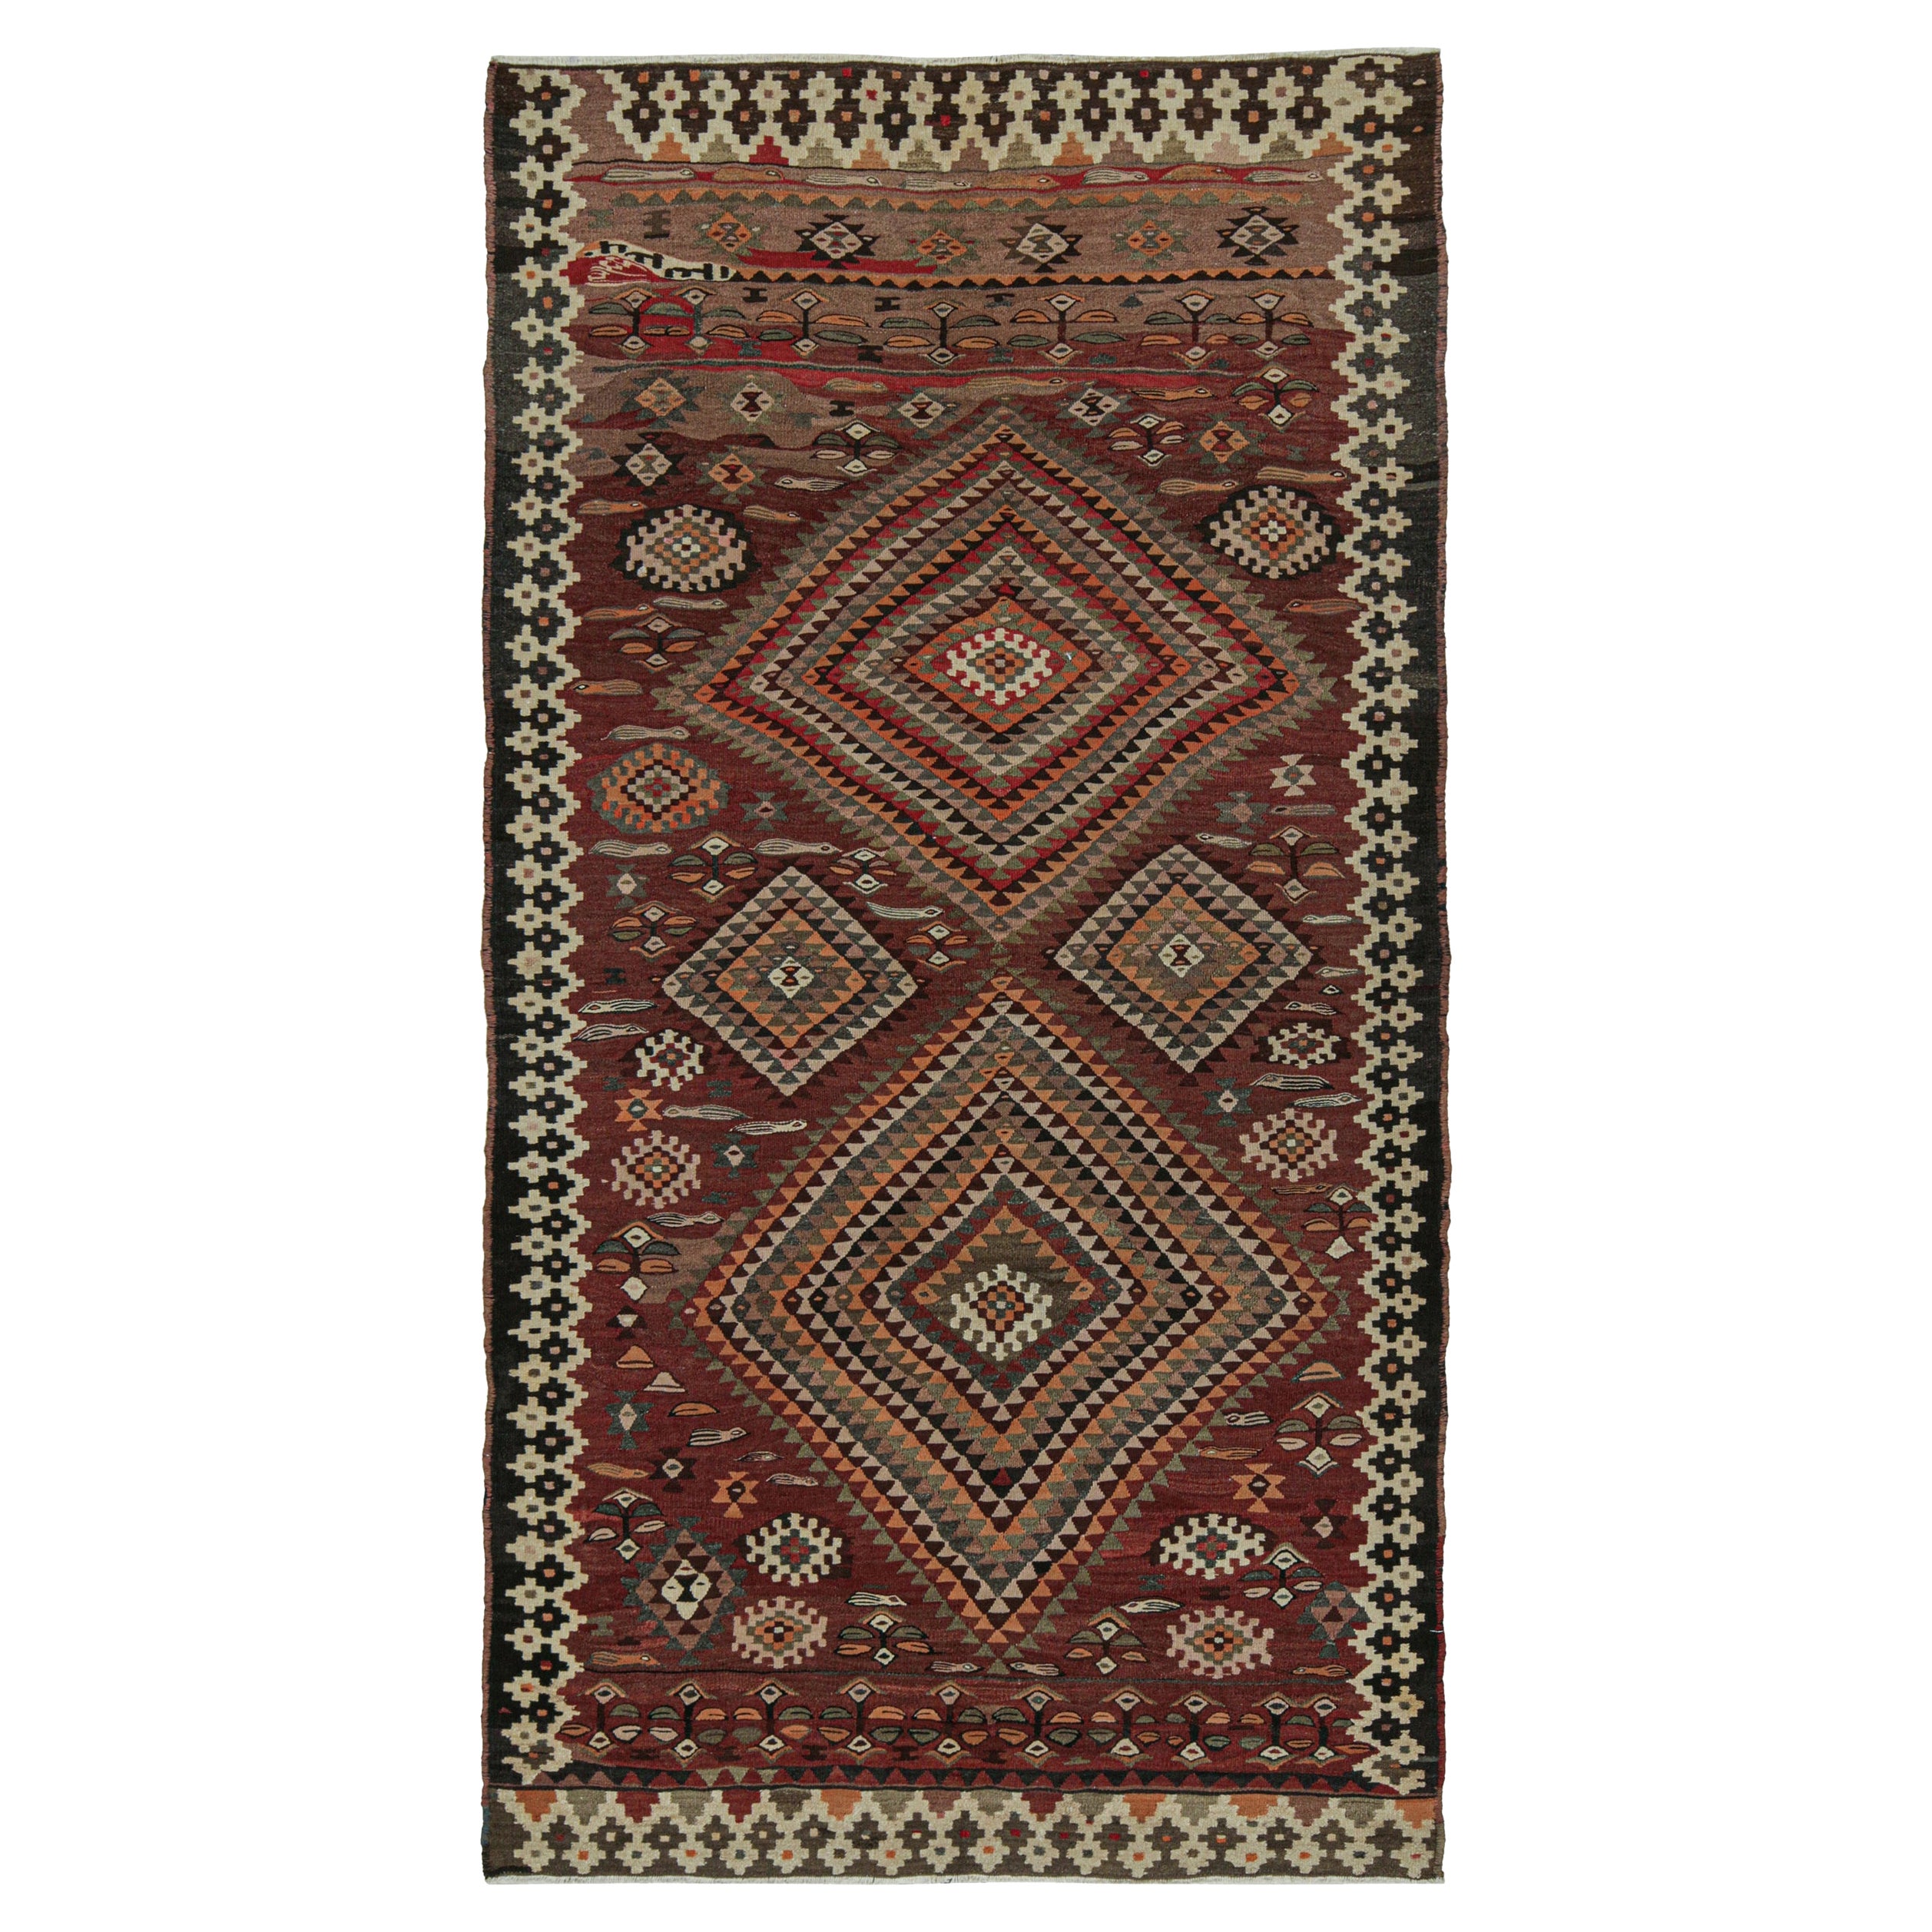 Vintage Shahsavan Persian Kilim in Red with Geometric Patterns